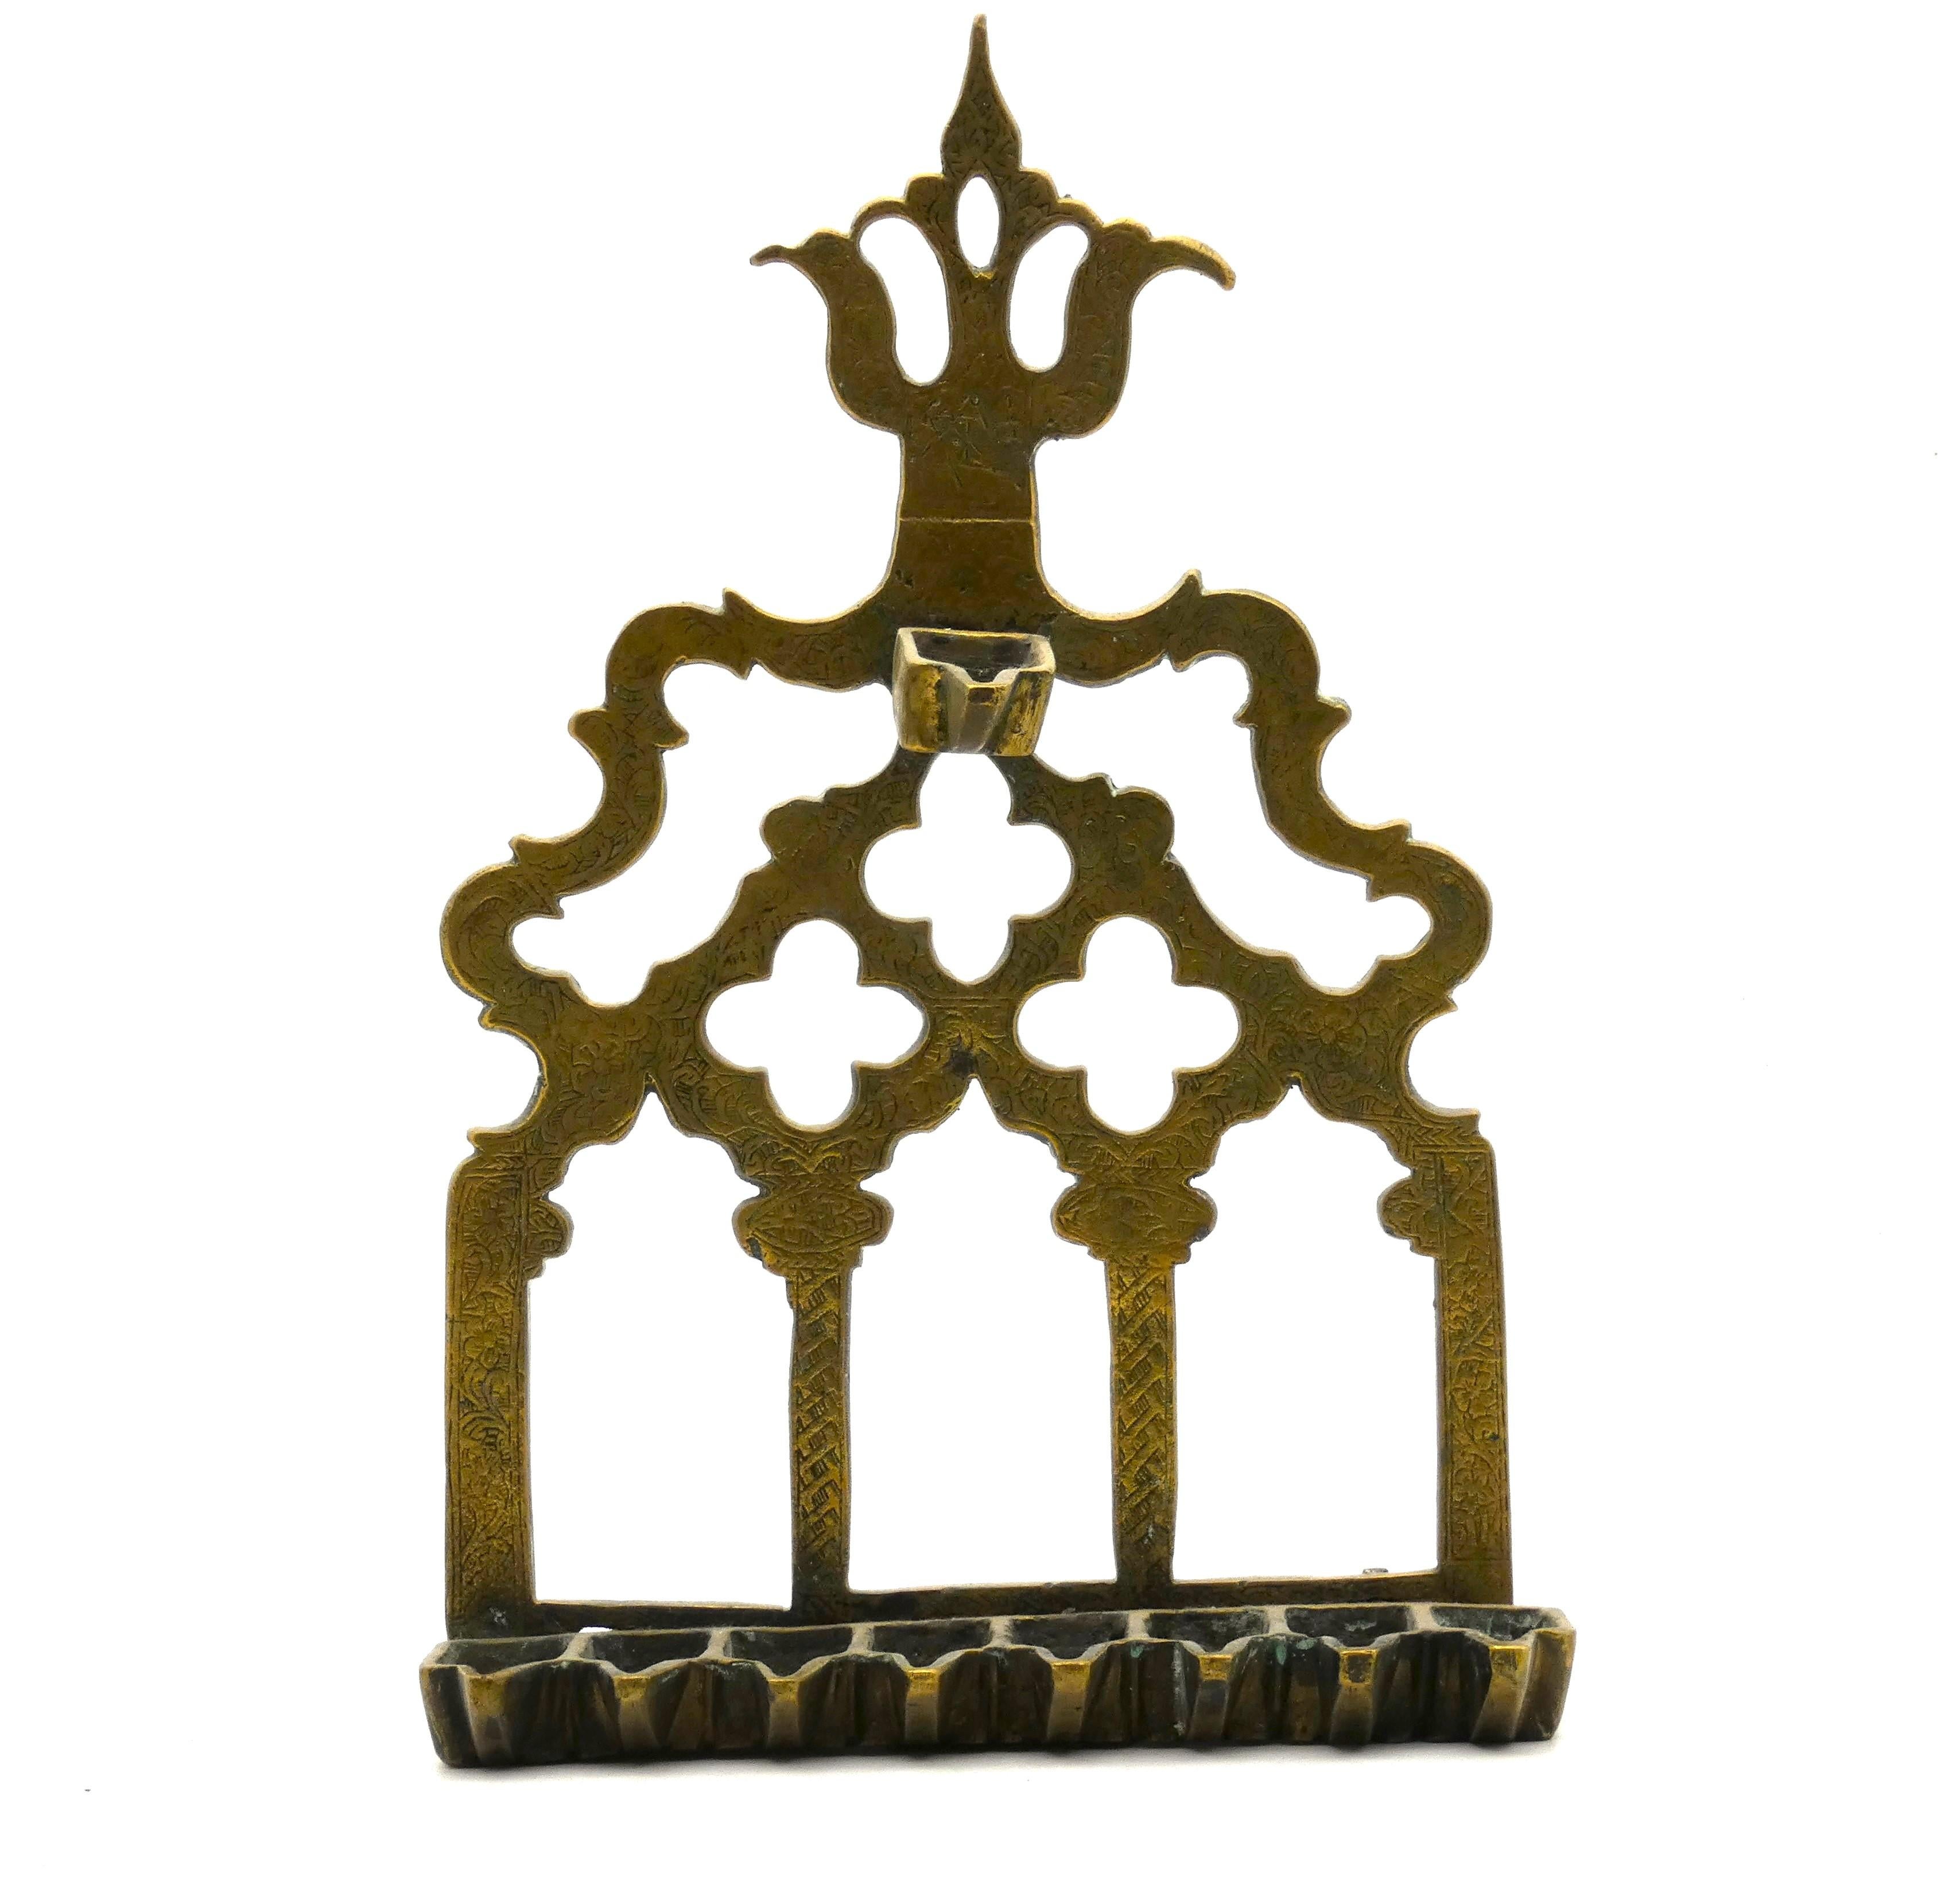 Hannukah lamp from Morocco made out of brass cast in the late 19th century.

The backplate for this menorah is built like the front of a structure with three doorways under three cloverleaf-formed windows, with two additional openings above them